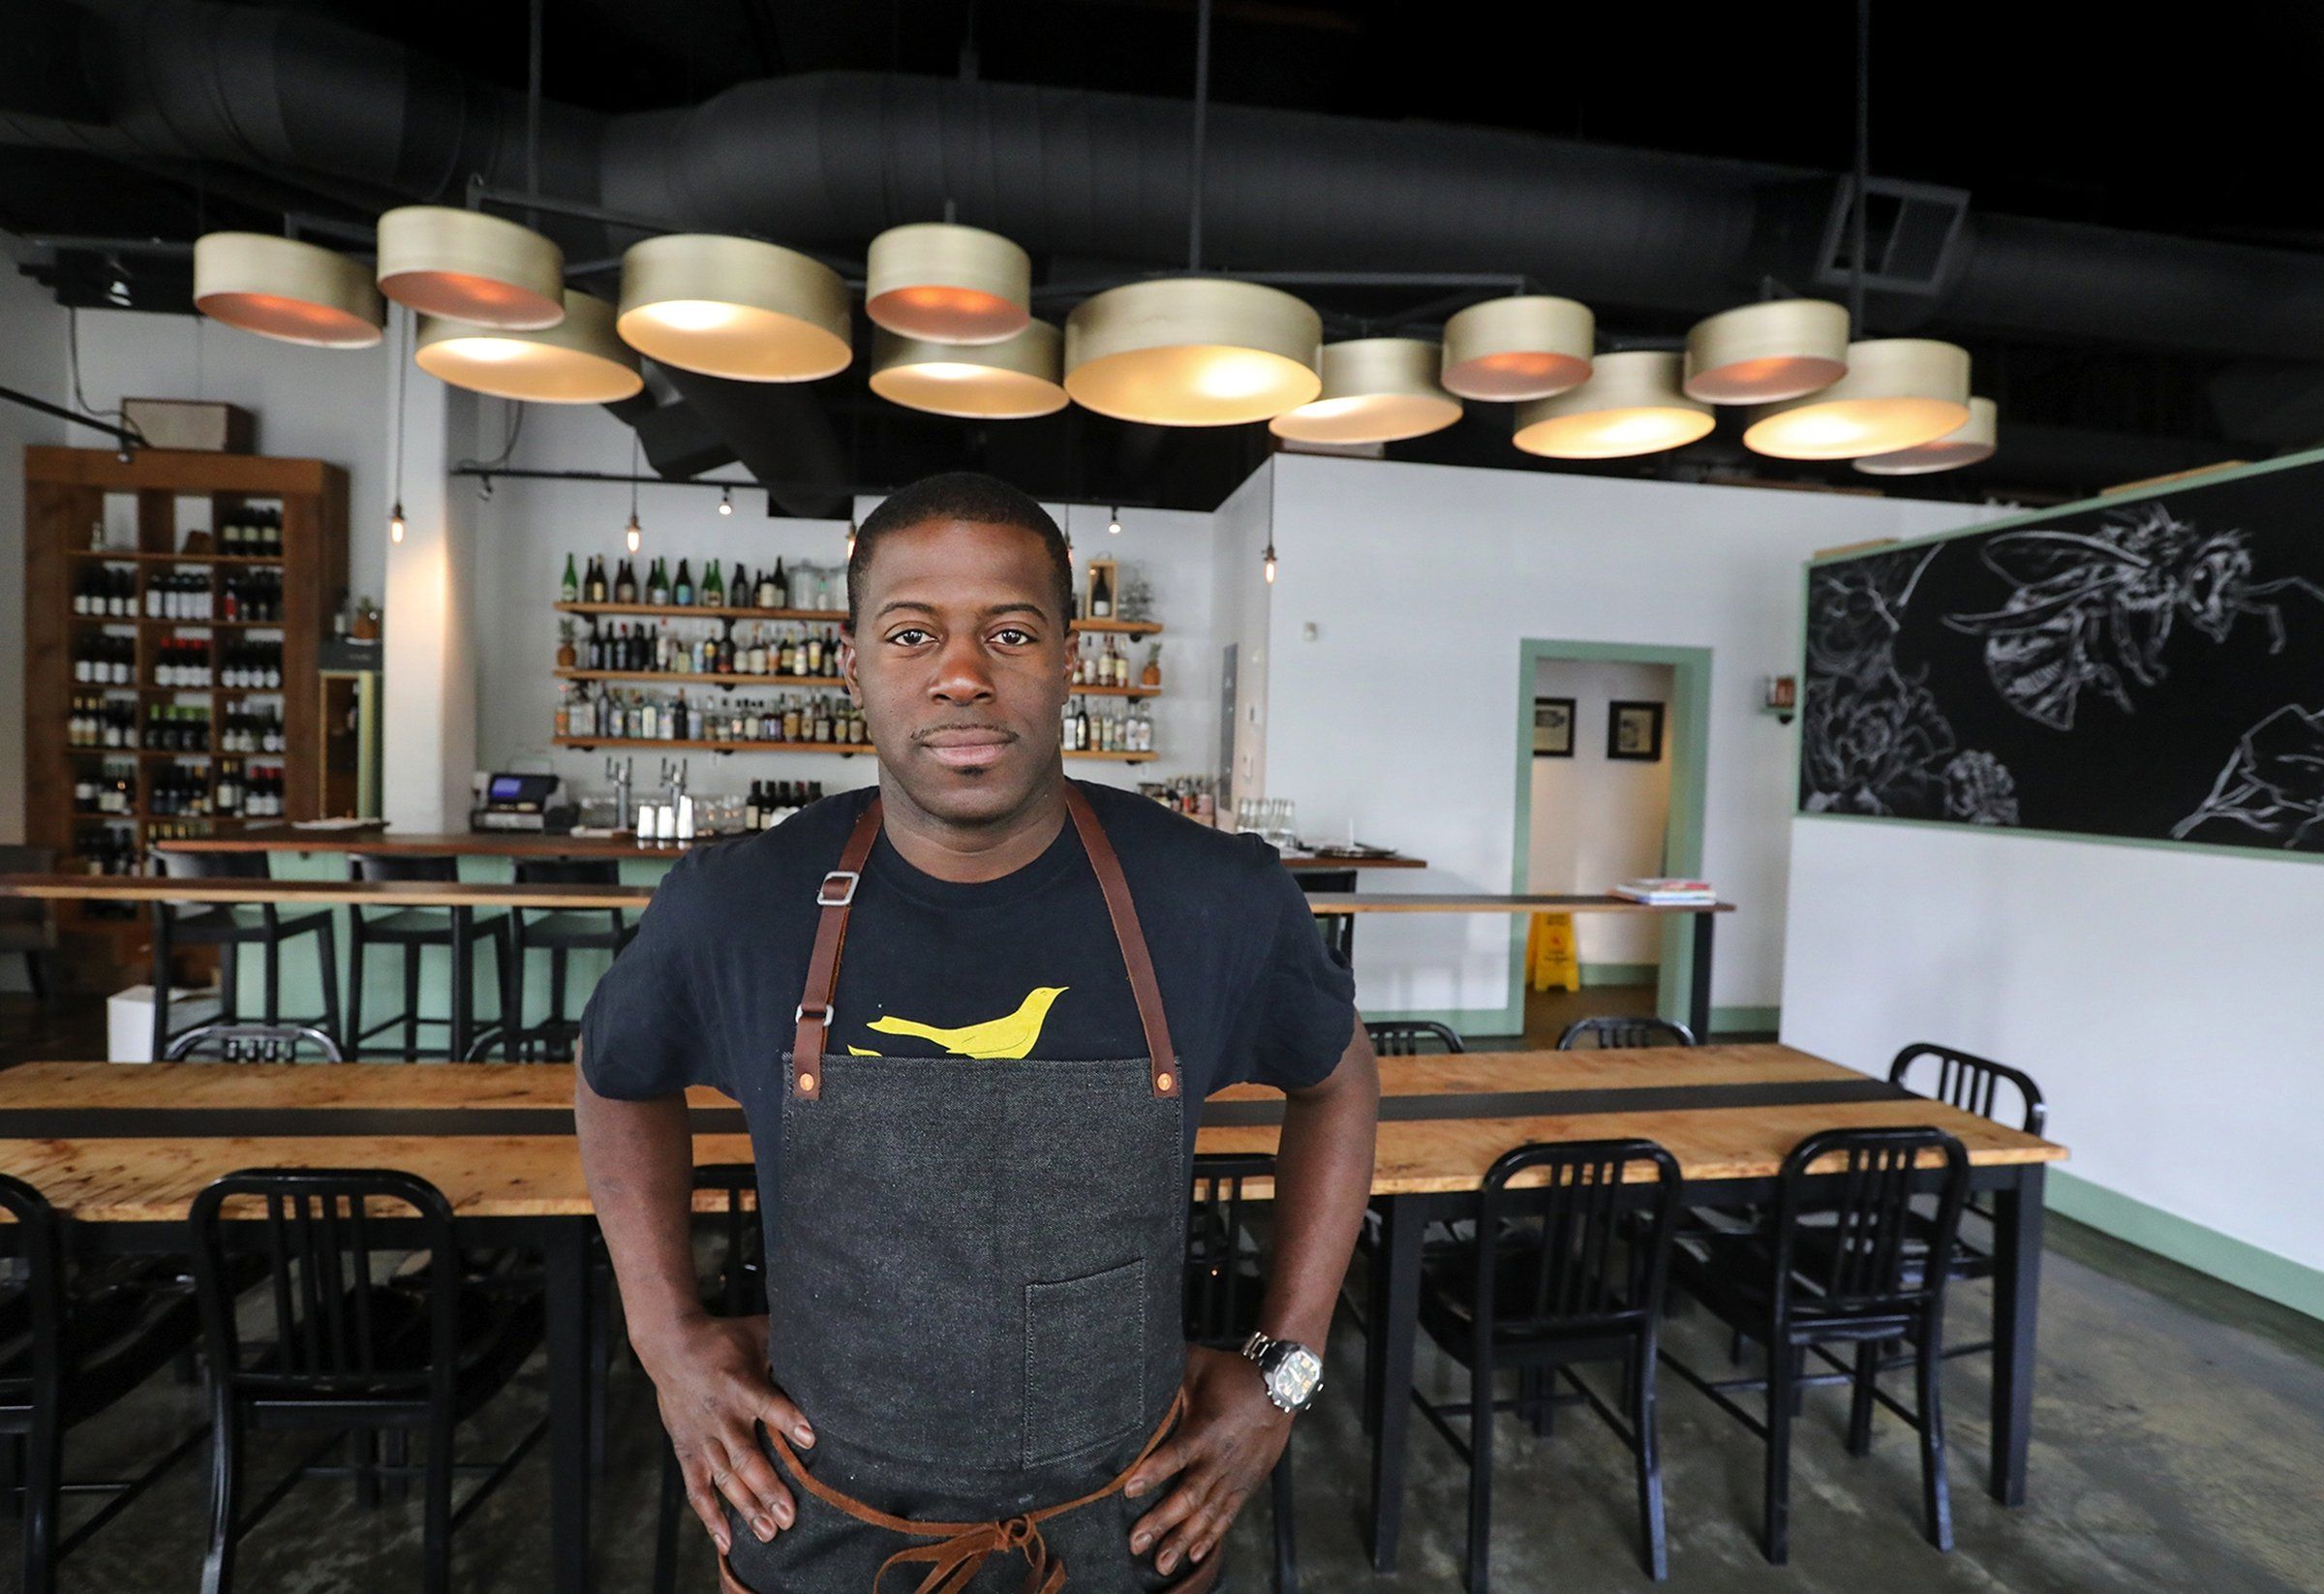 Edouardo Jordan, acclaimed Seattle chef, accused by 15 women of sexual misconduct or unwanted touching The Seattle Times pic